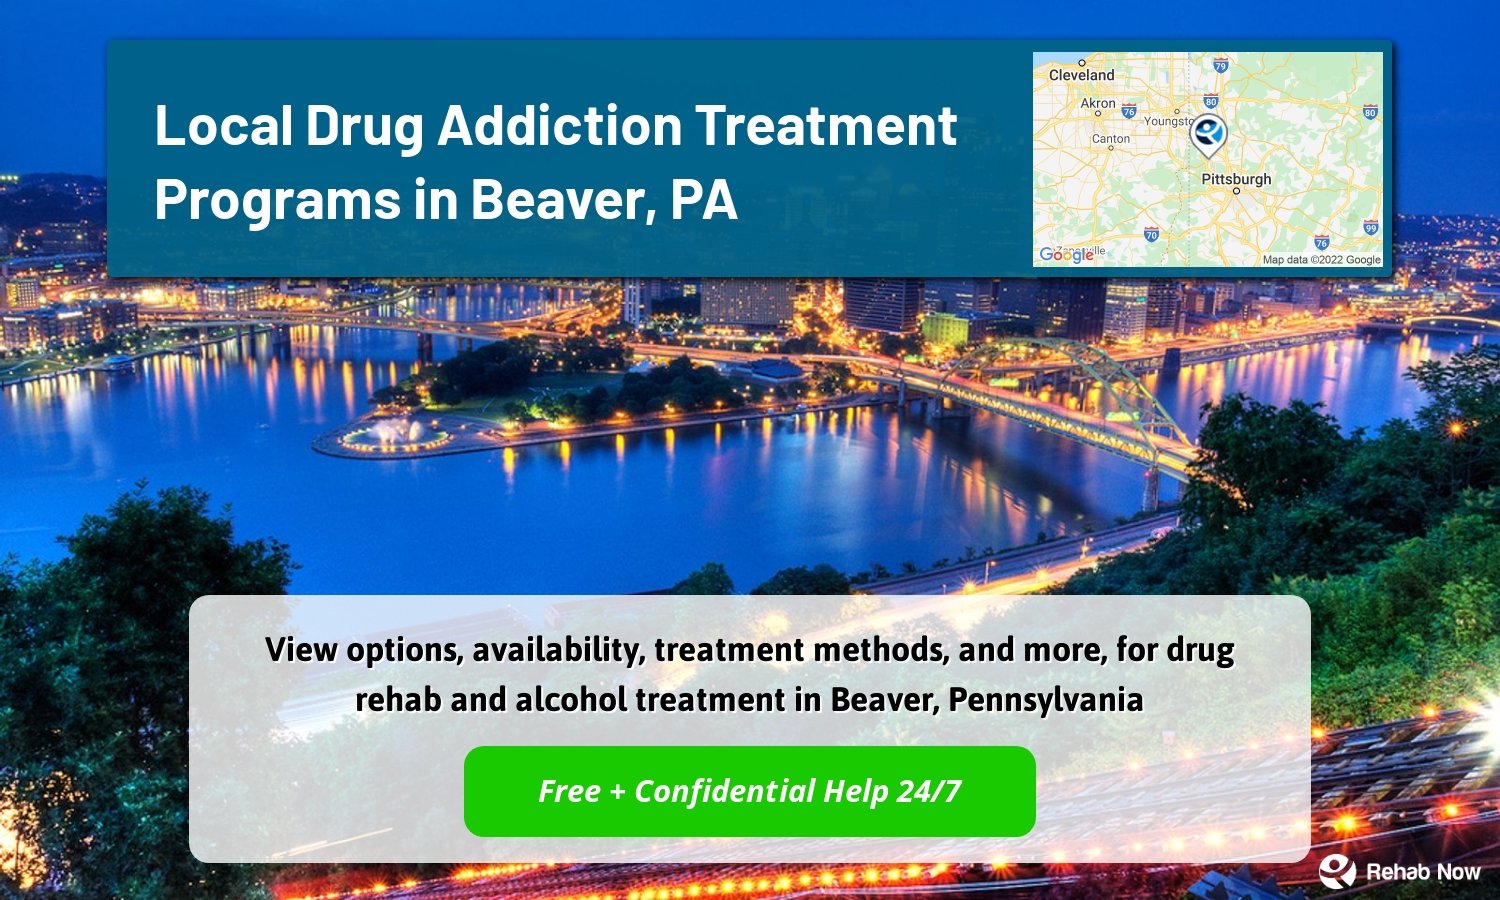 View options, availability, treatment methods, and more, for drug rehab and alcohol treatment in Beaver, Pennsylvania